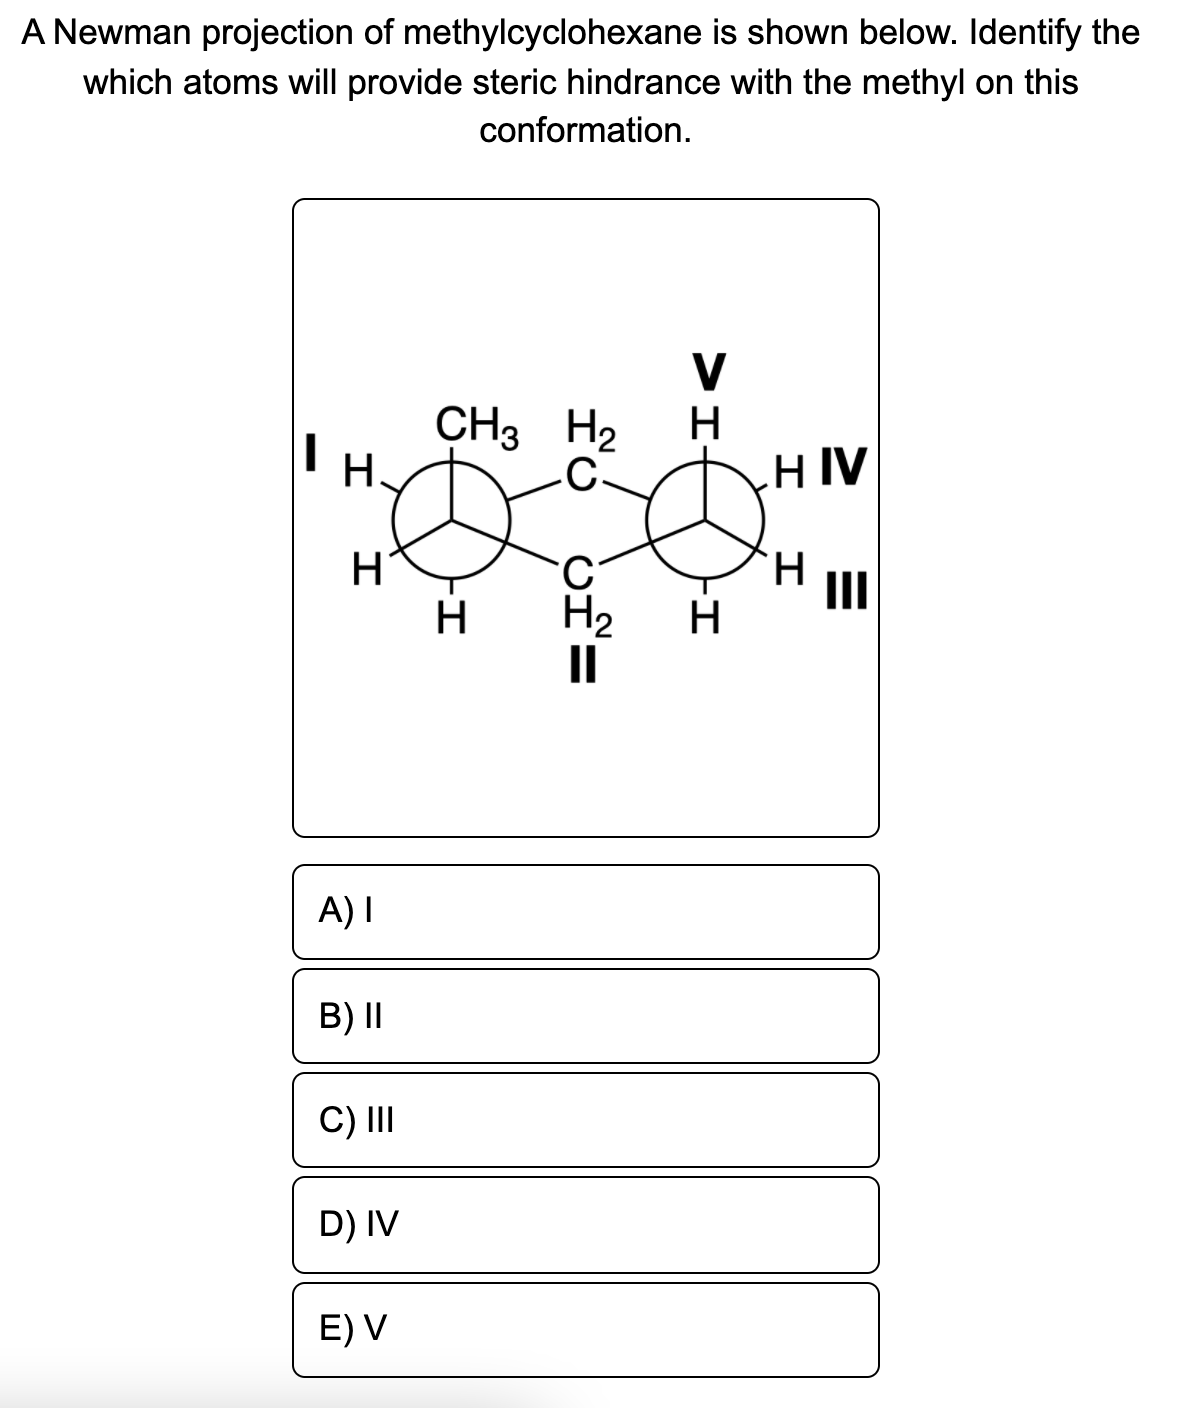 A Newman projection of methylcyclohexane is shown below. Identify the
which atoms will provide steric hindrance with the methyl on this
conformation.
V
CH3 H2
H.
H
HIV
II
H2
II
H
H
A) I
B) II
C)II
D) IV
E) V
